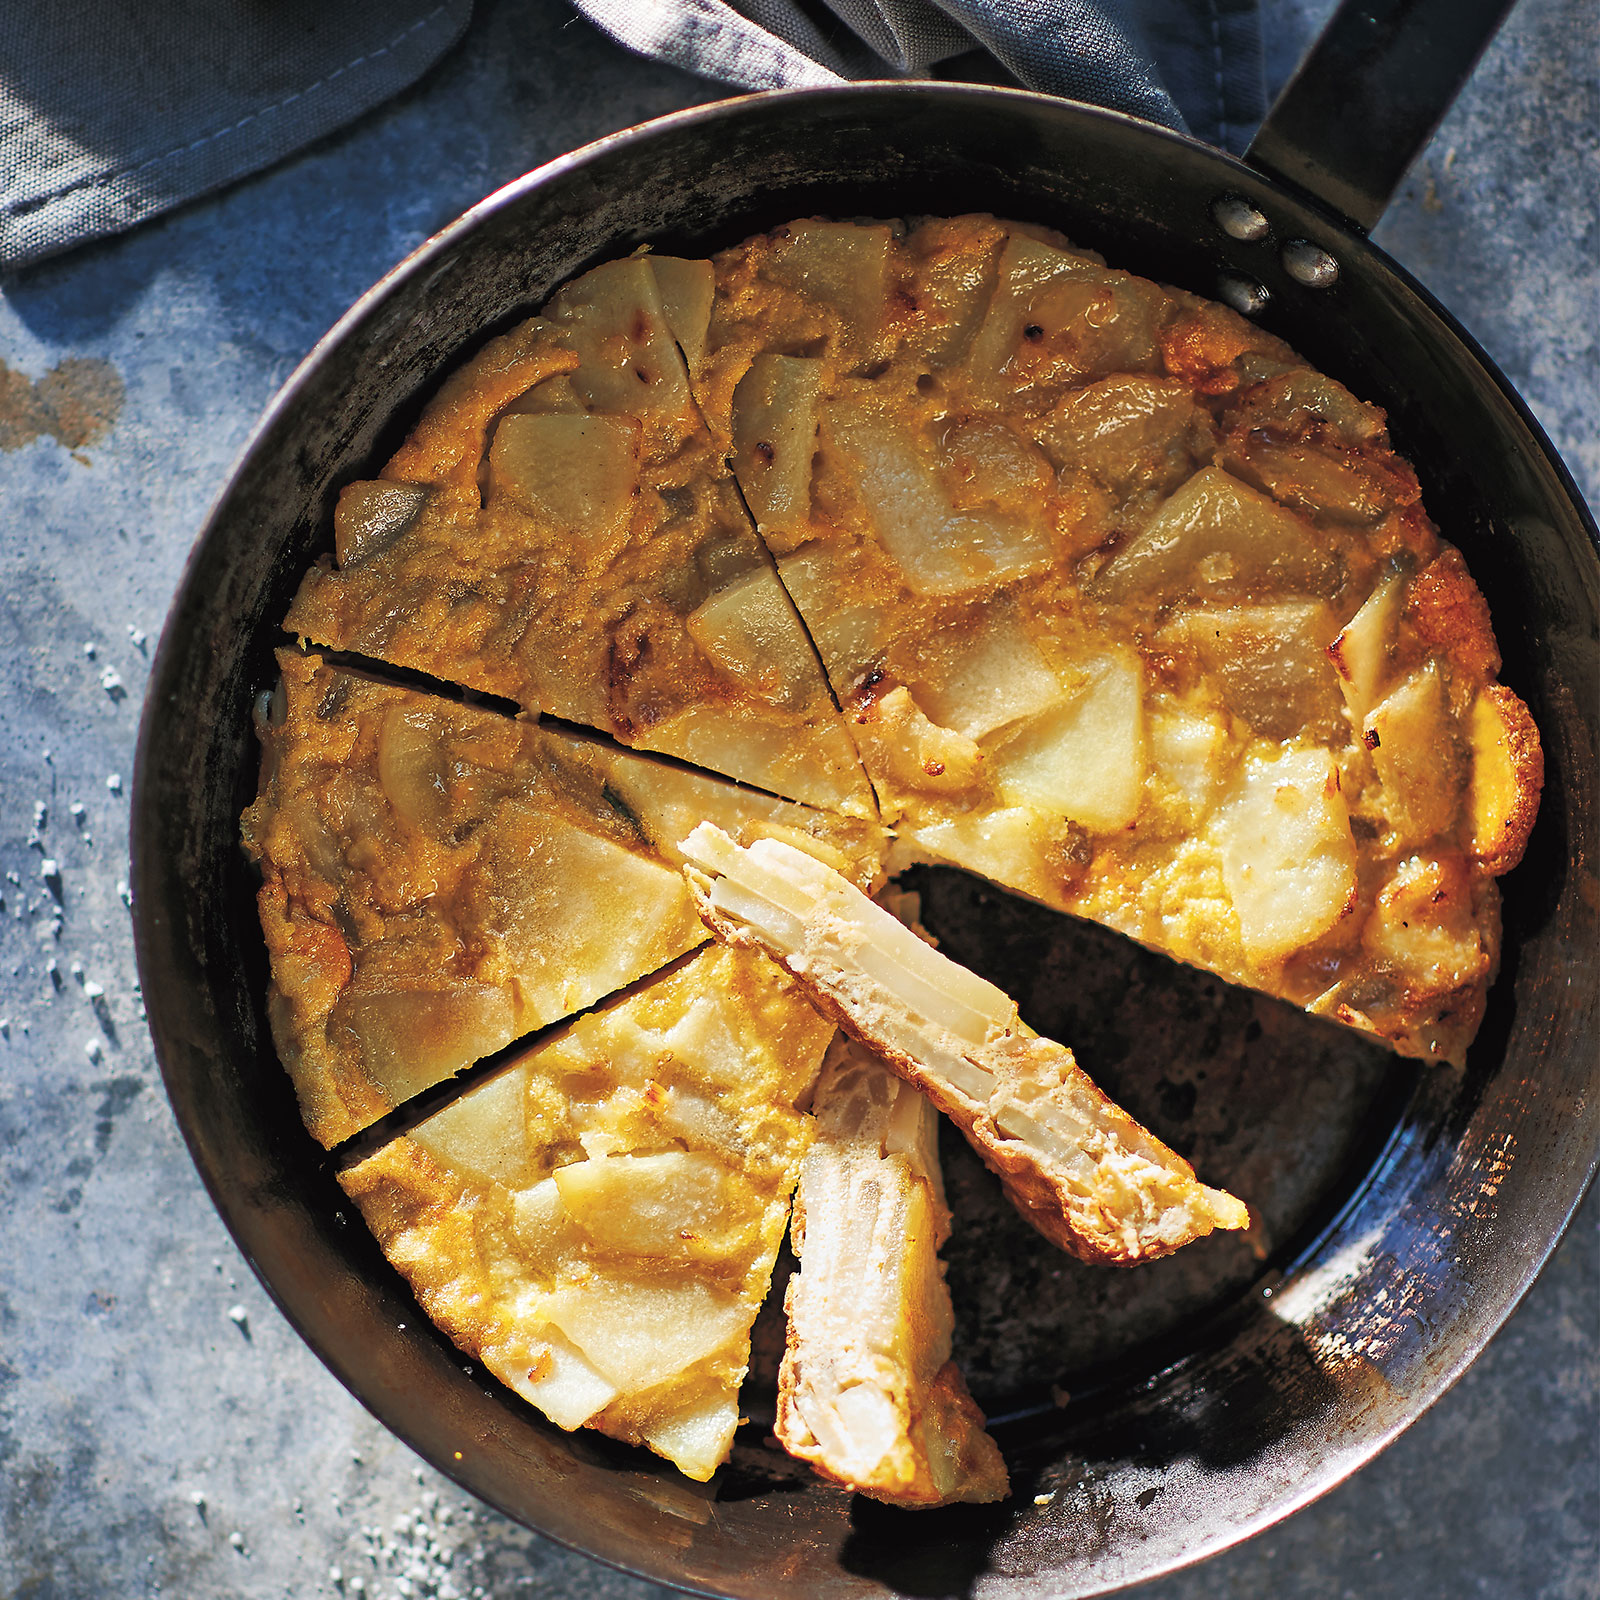 Tortilla De Patatas in a oven-proof pan. Shot overhead and sliced into wedges ready to serve.